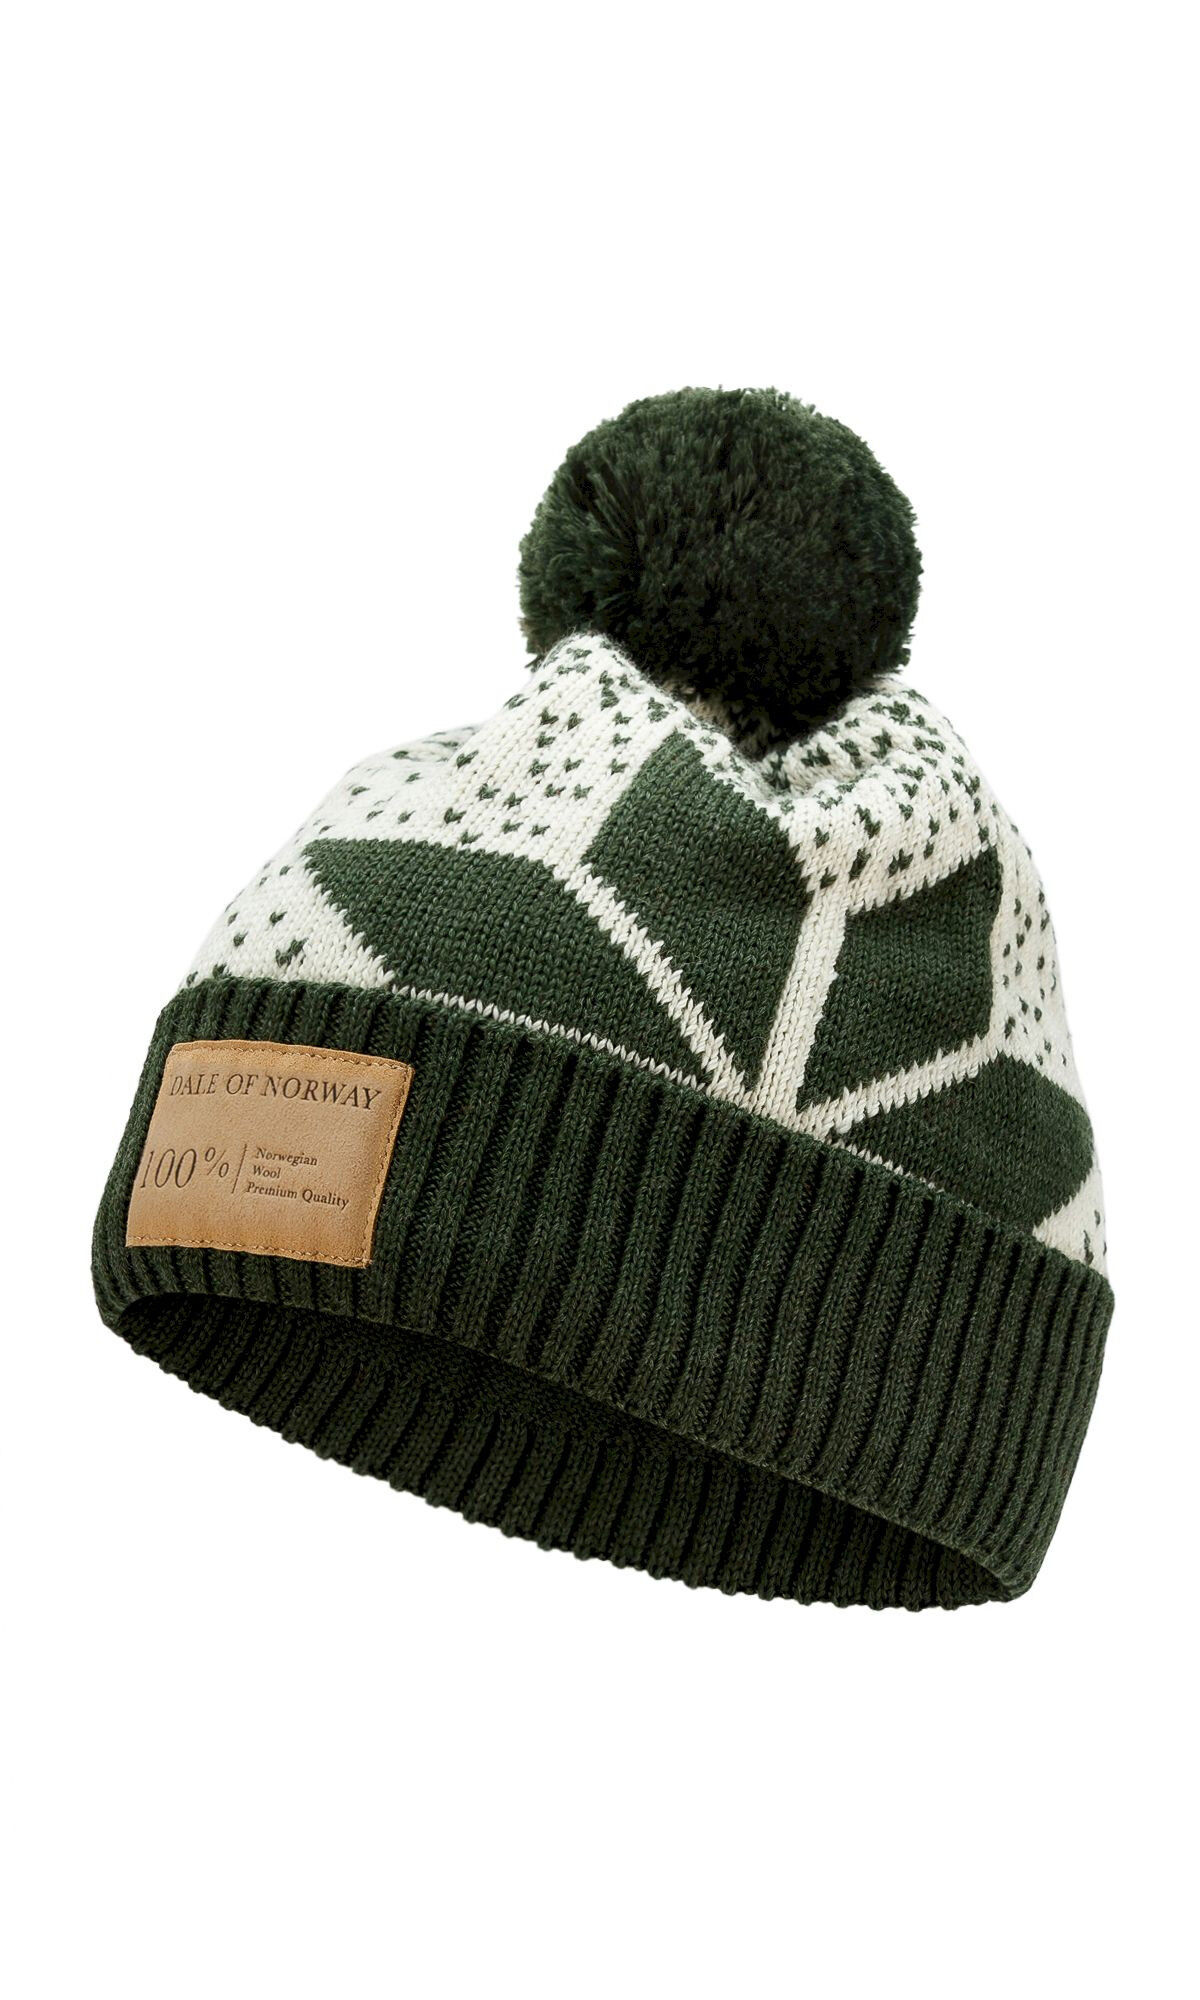 Dale of Norway Winter Star Hat - Beanie